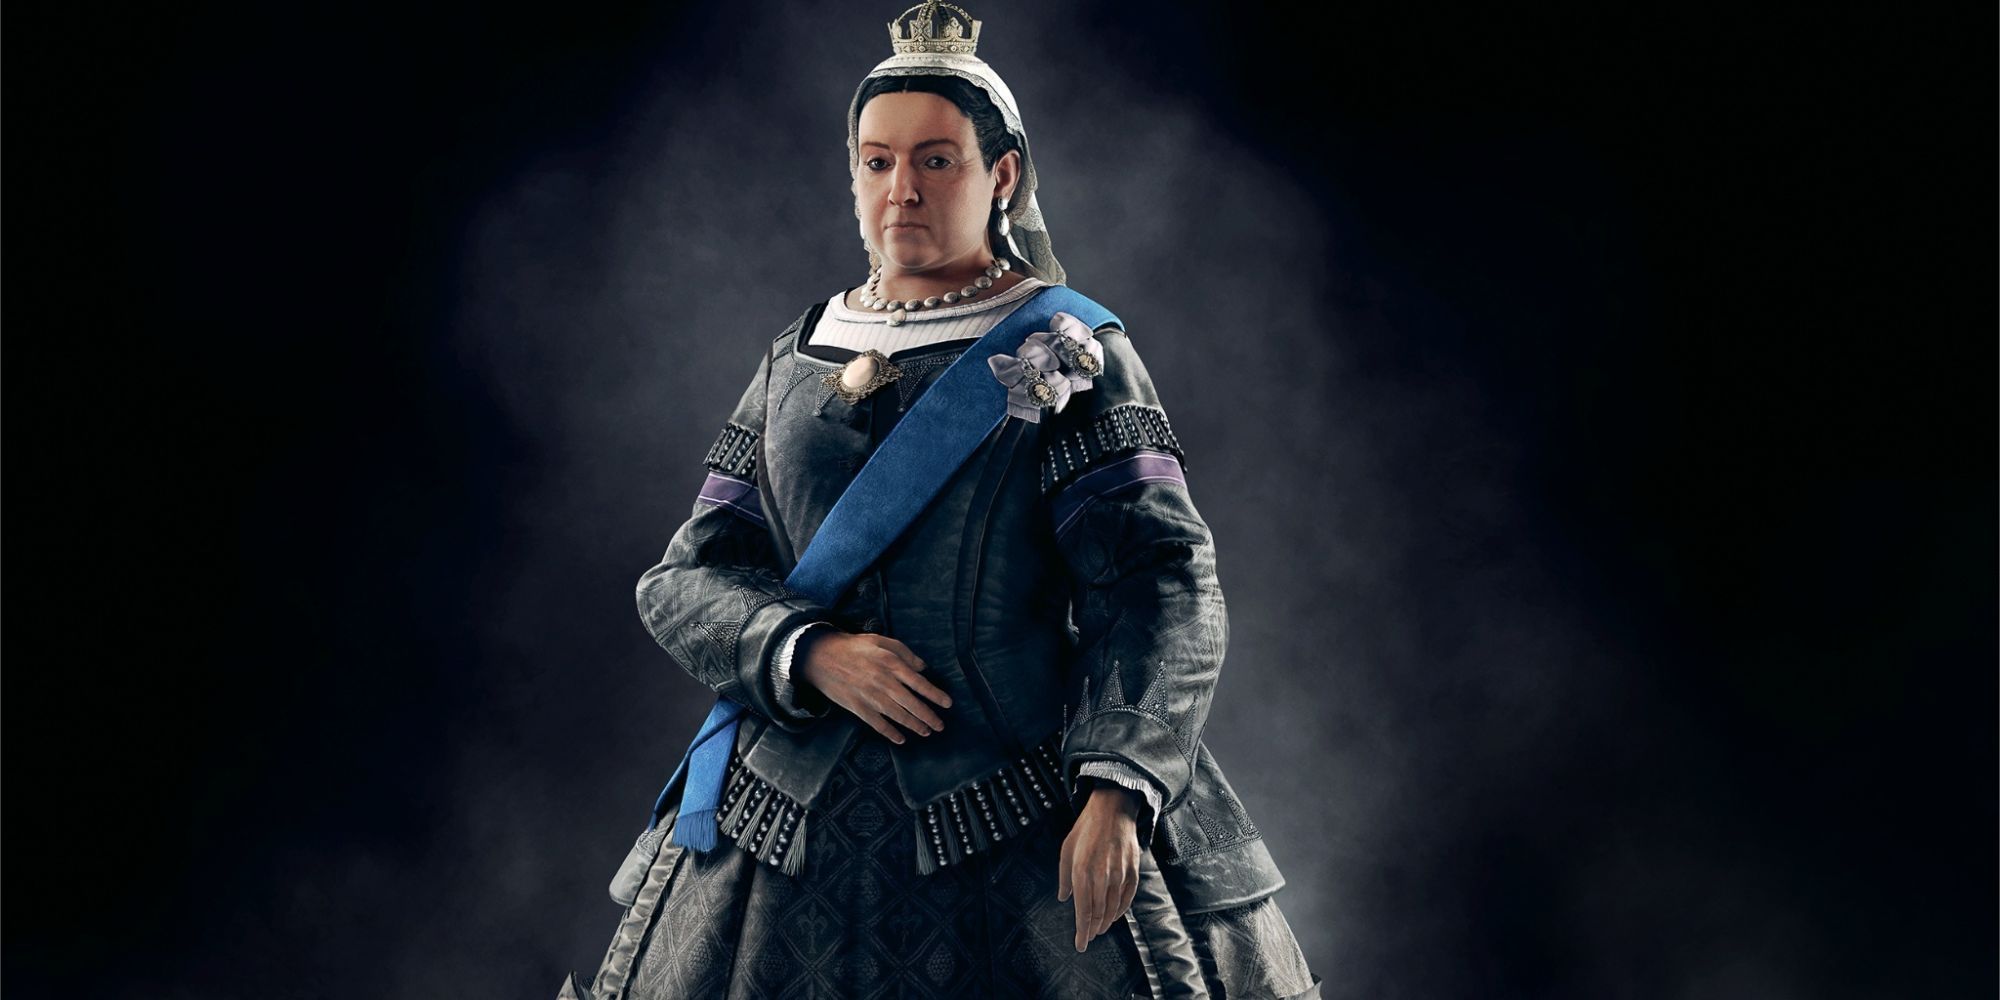 image of Queen Victoria in the video game Assassins Creed Syndicate